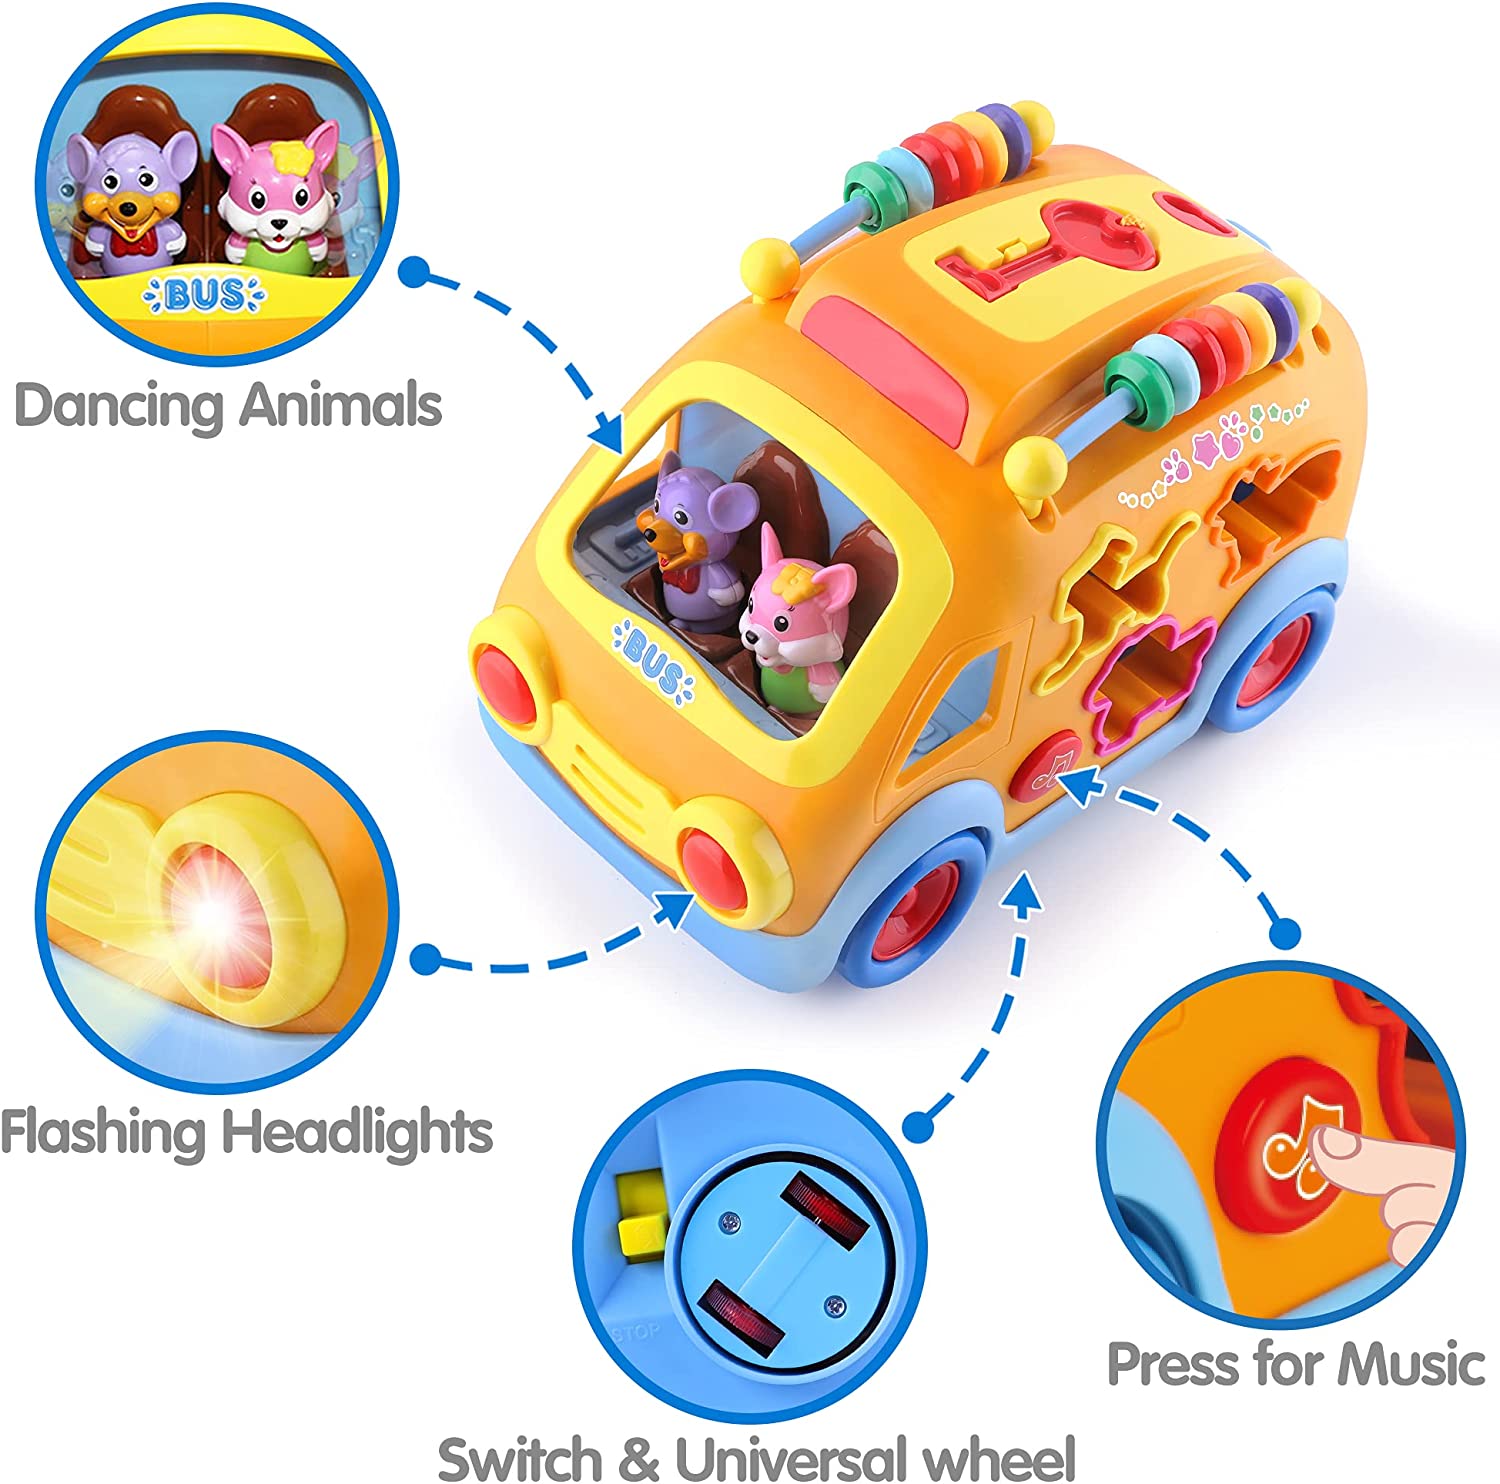 Toddler Music Bus Toys, Baby Musical Busy Learning Toy W/Animal Matching, Gear, Key, Infant Electronic Car W/Light Sound, Birthday Gifts for 18 Month, 2 3 Year Old Kid Boy Girl